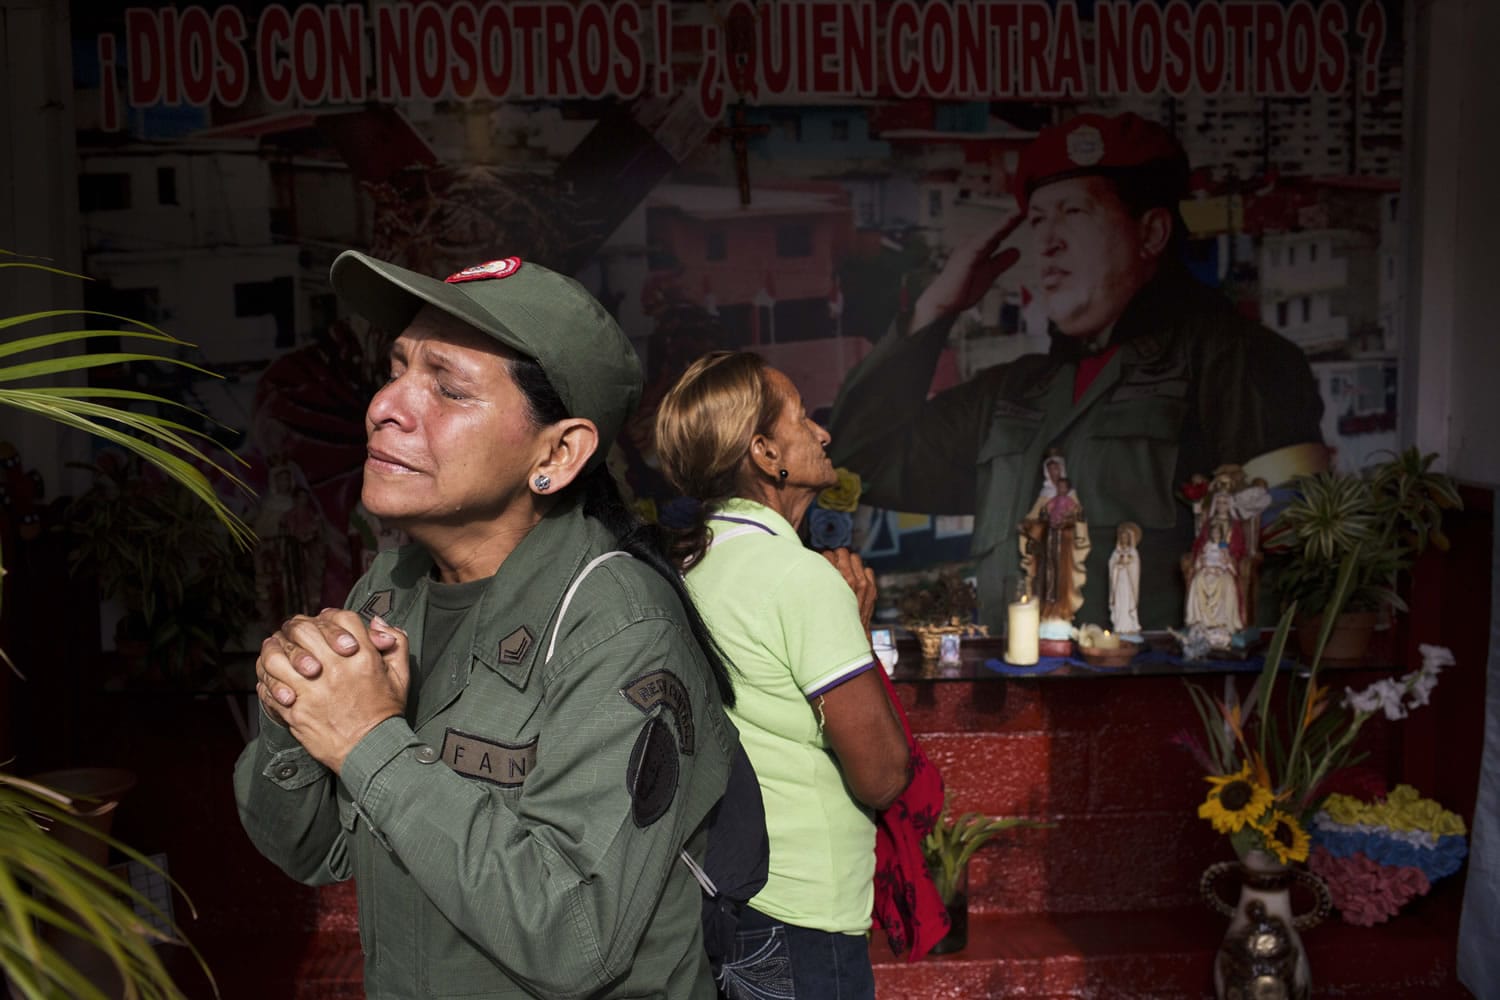 Marisol Perez, a Venezuelan Army specialist, cries while visiting a chapel to mark the one-year anniversary of the death of President Hugo Chavez on Wednesday in Caracas, Venezuela.